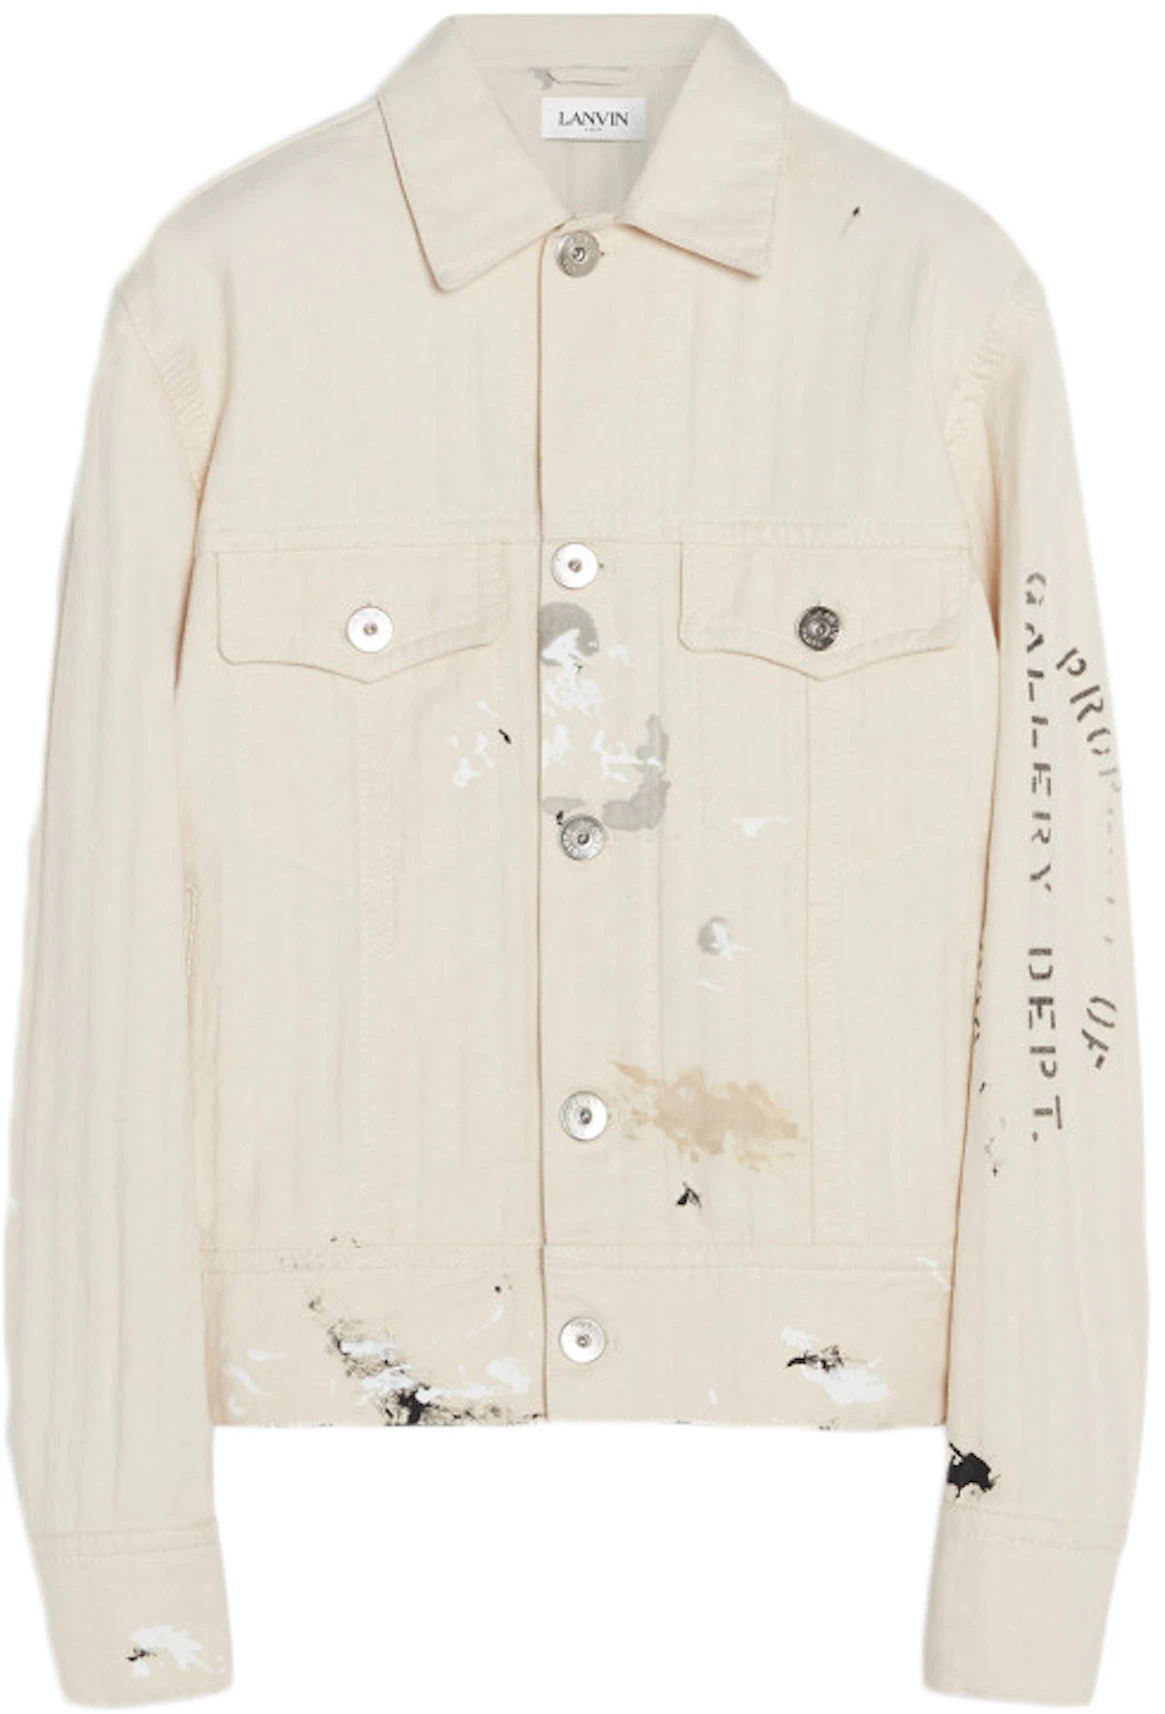 Lanvin x Gallery Dept. Denim Jacket With Paint Marks White - SS21 - IT